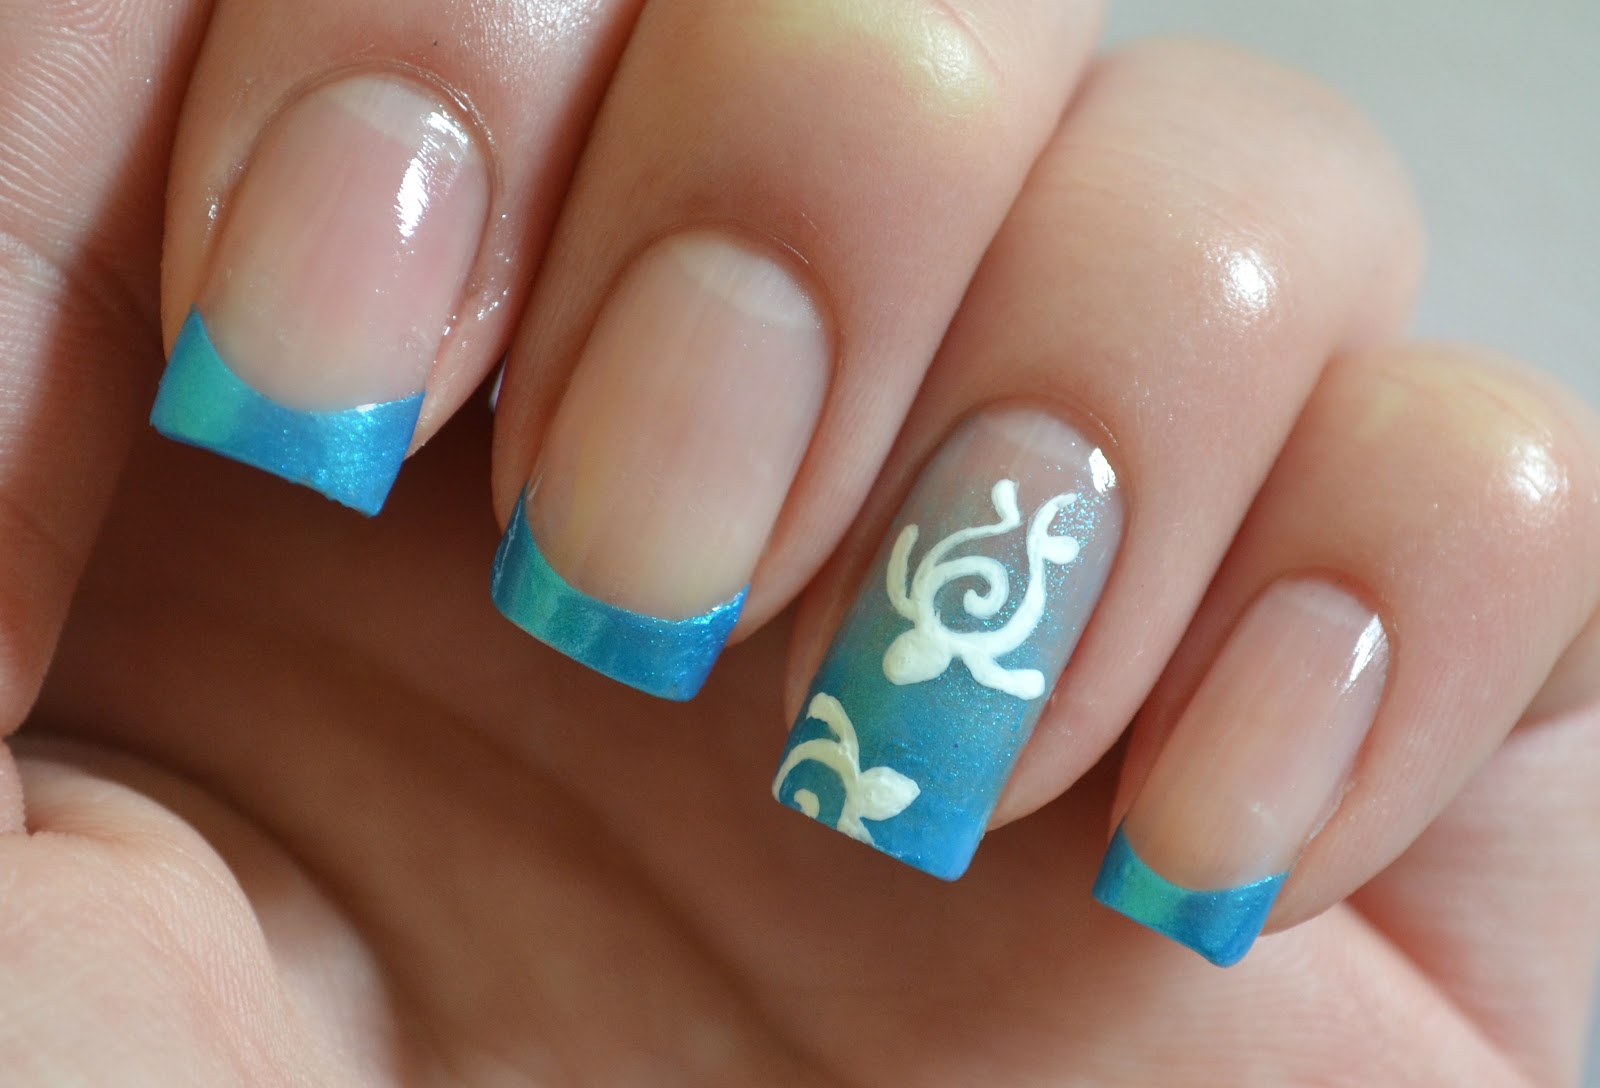 2. Beachy Nail Designs for Summer - wide 4